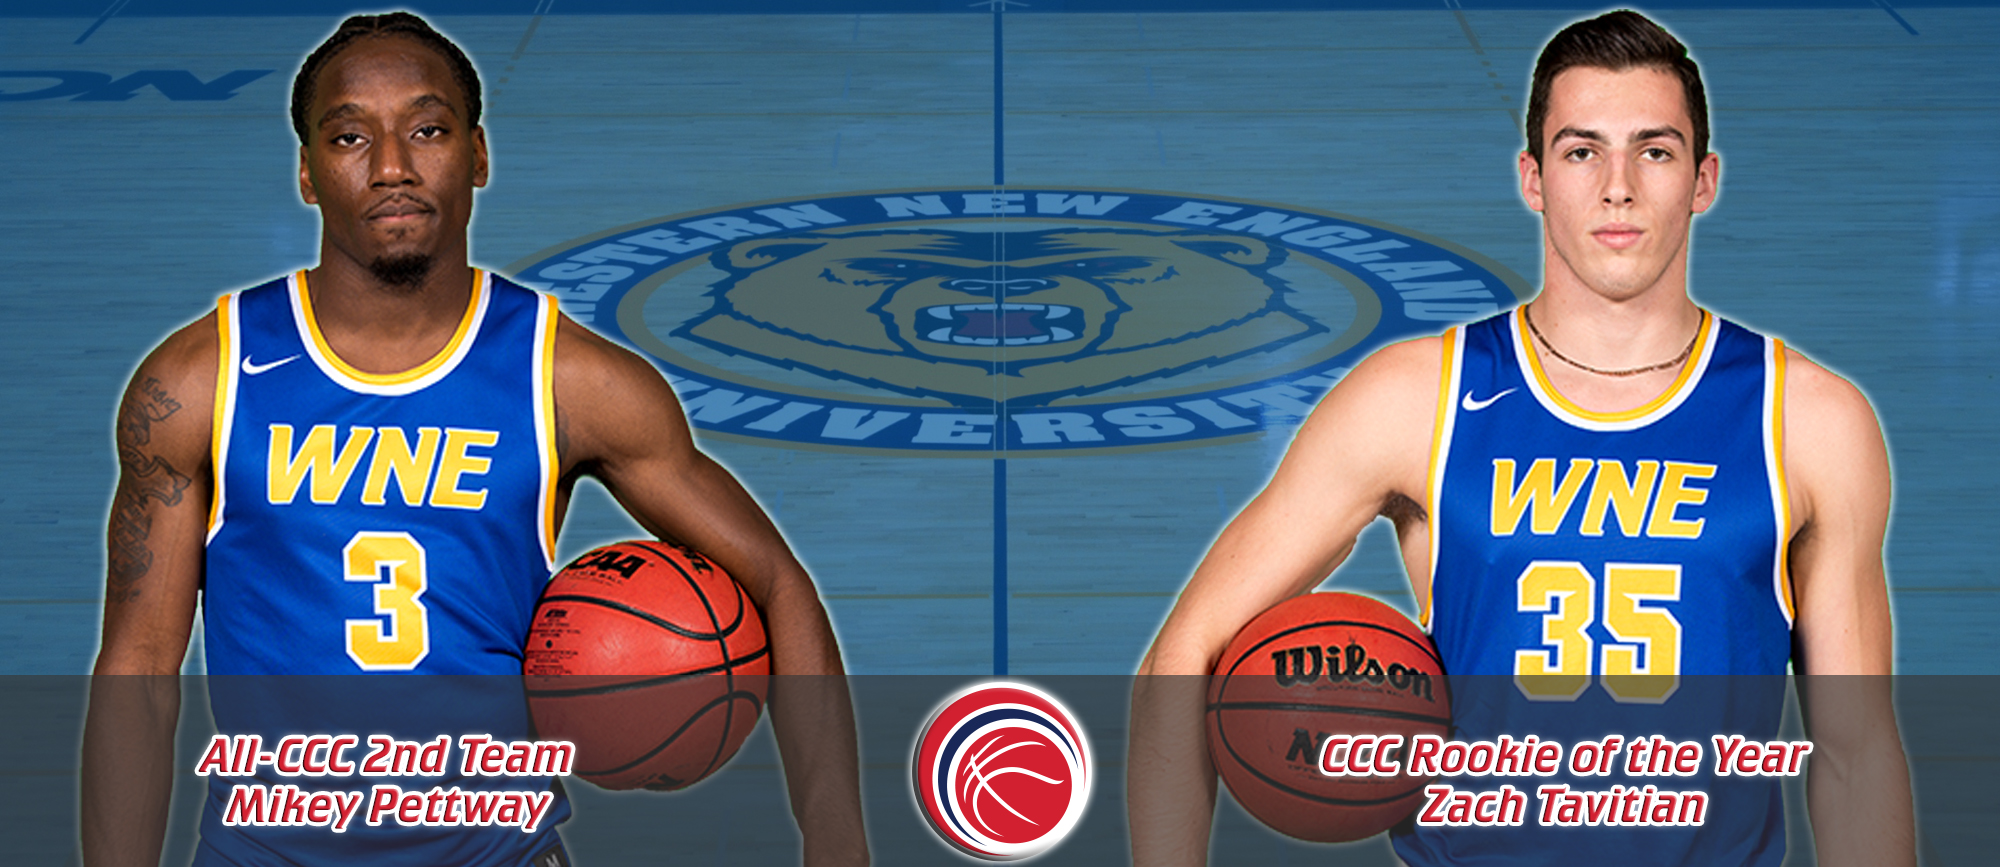 Pettway Earns All-CCC Second Team Honors, Tavitian Named CCC Rookie of the Year